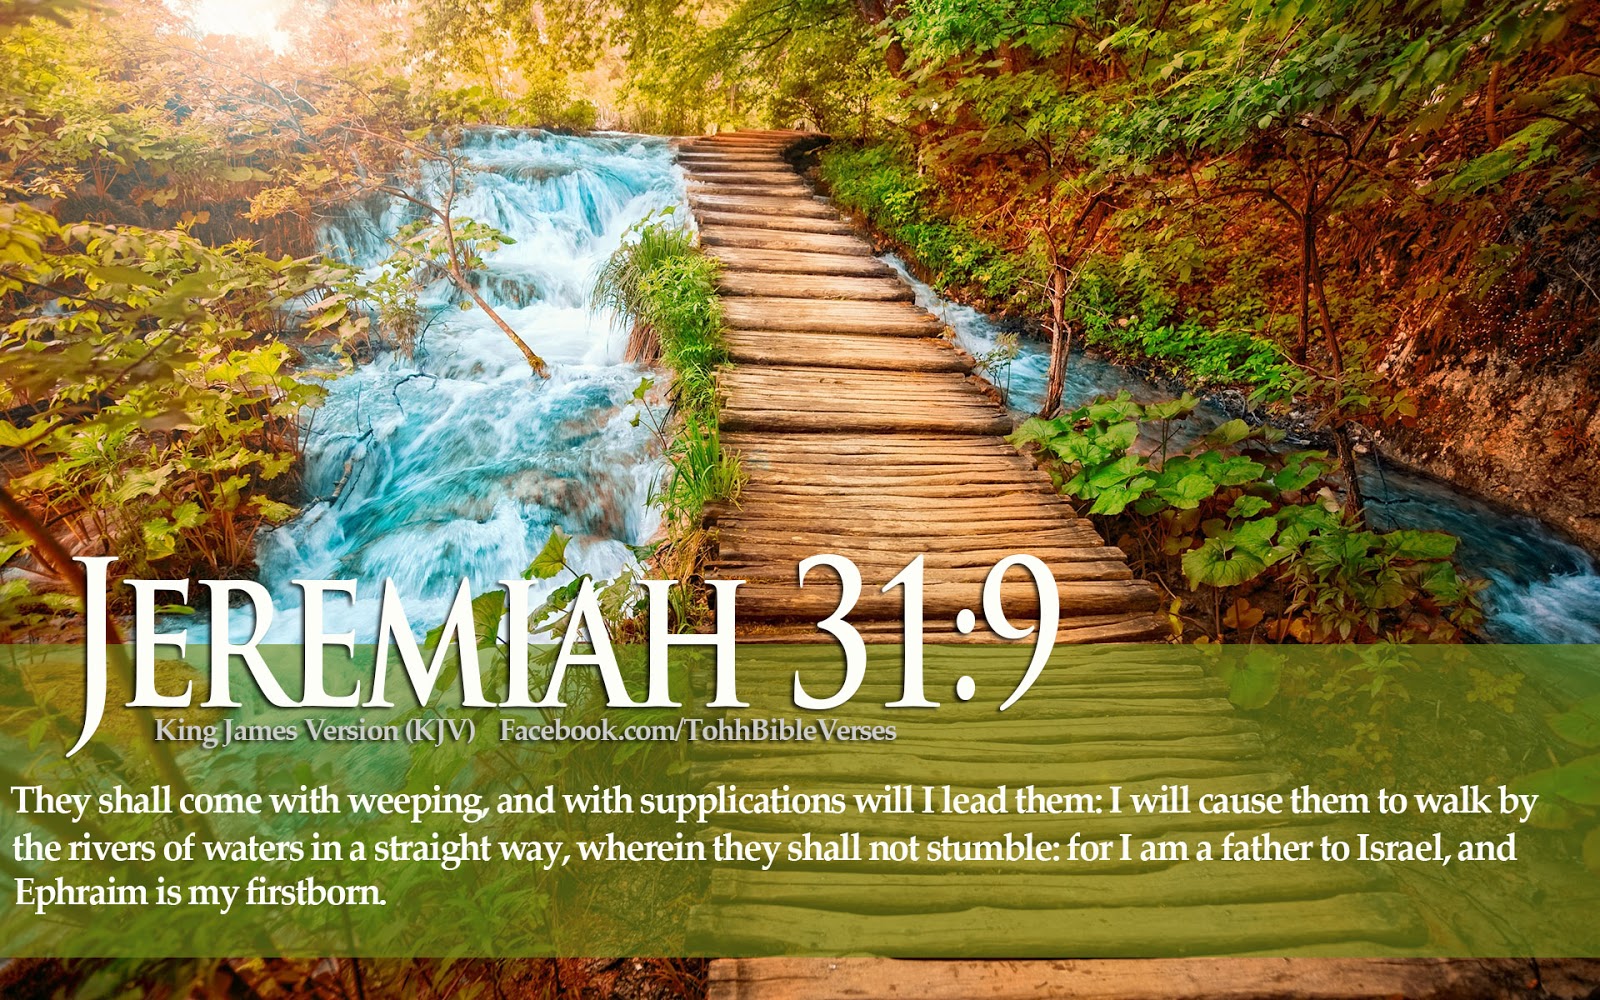 Bible Verse Greetings Card Wallpaper Christian Image With